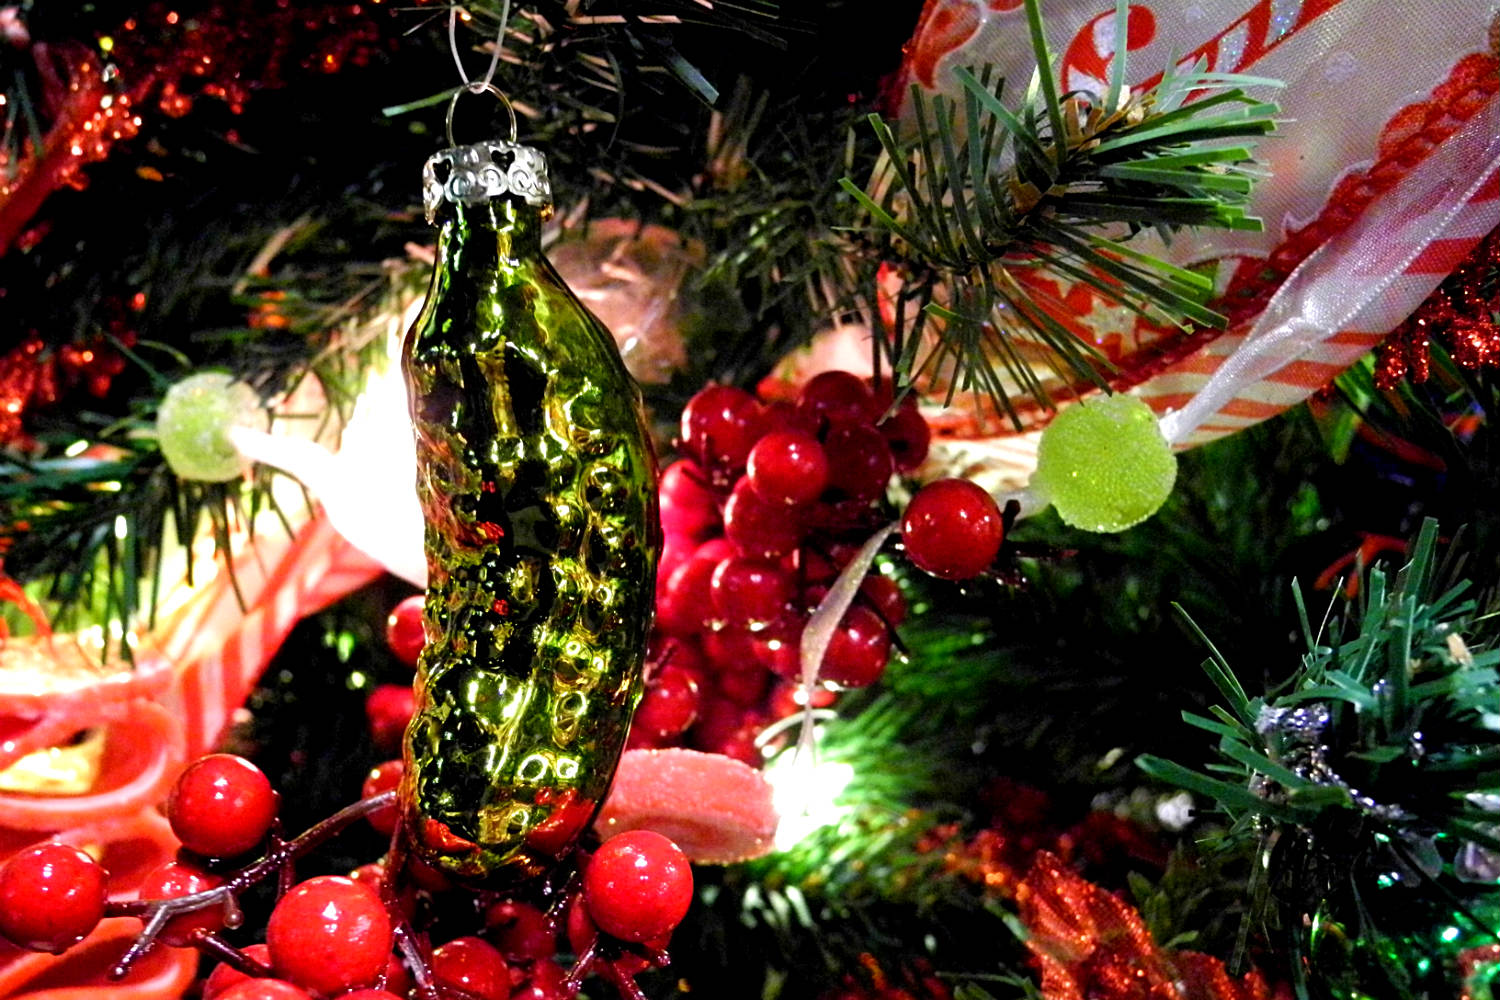  In Germany, pickles are hung on Christmas trees